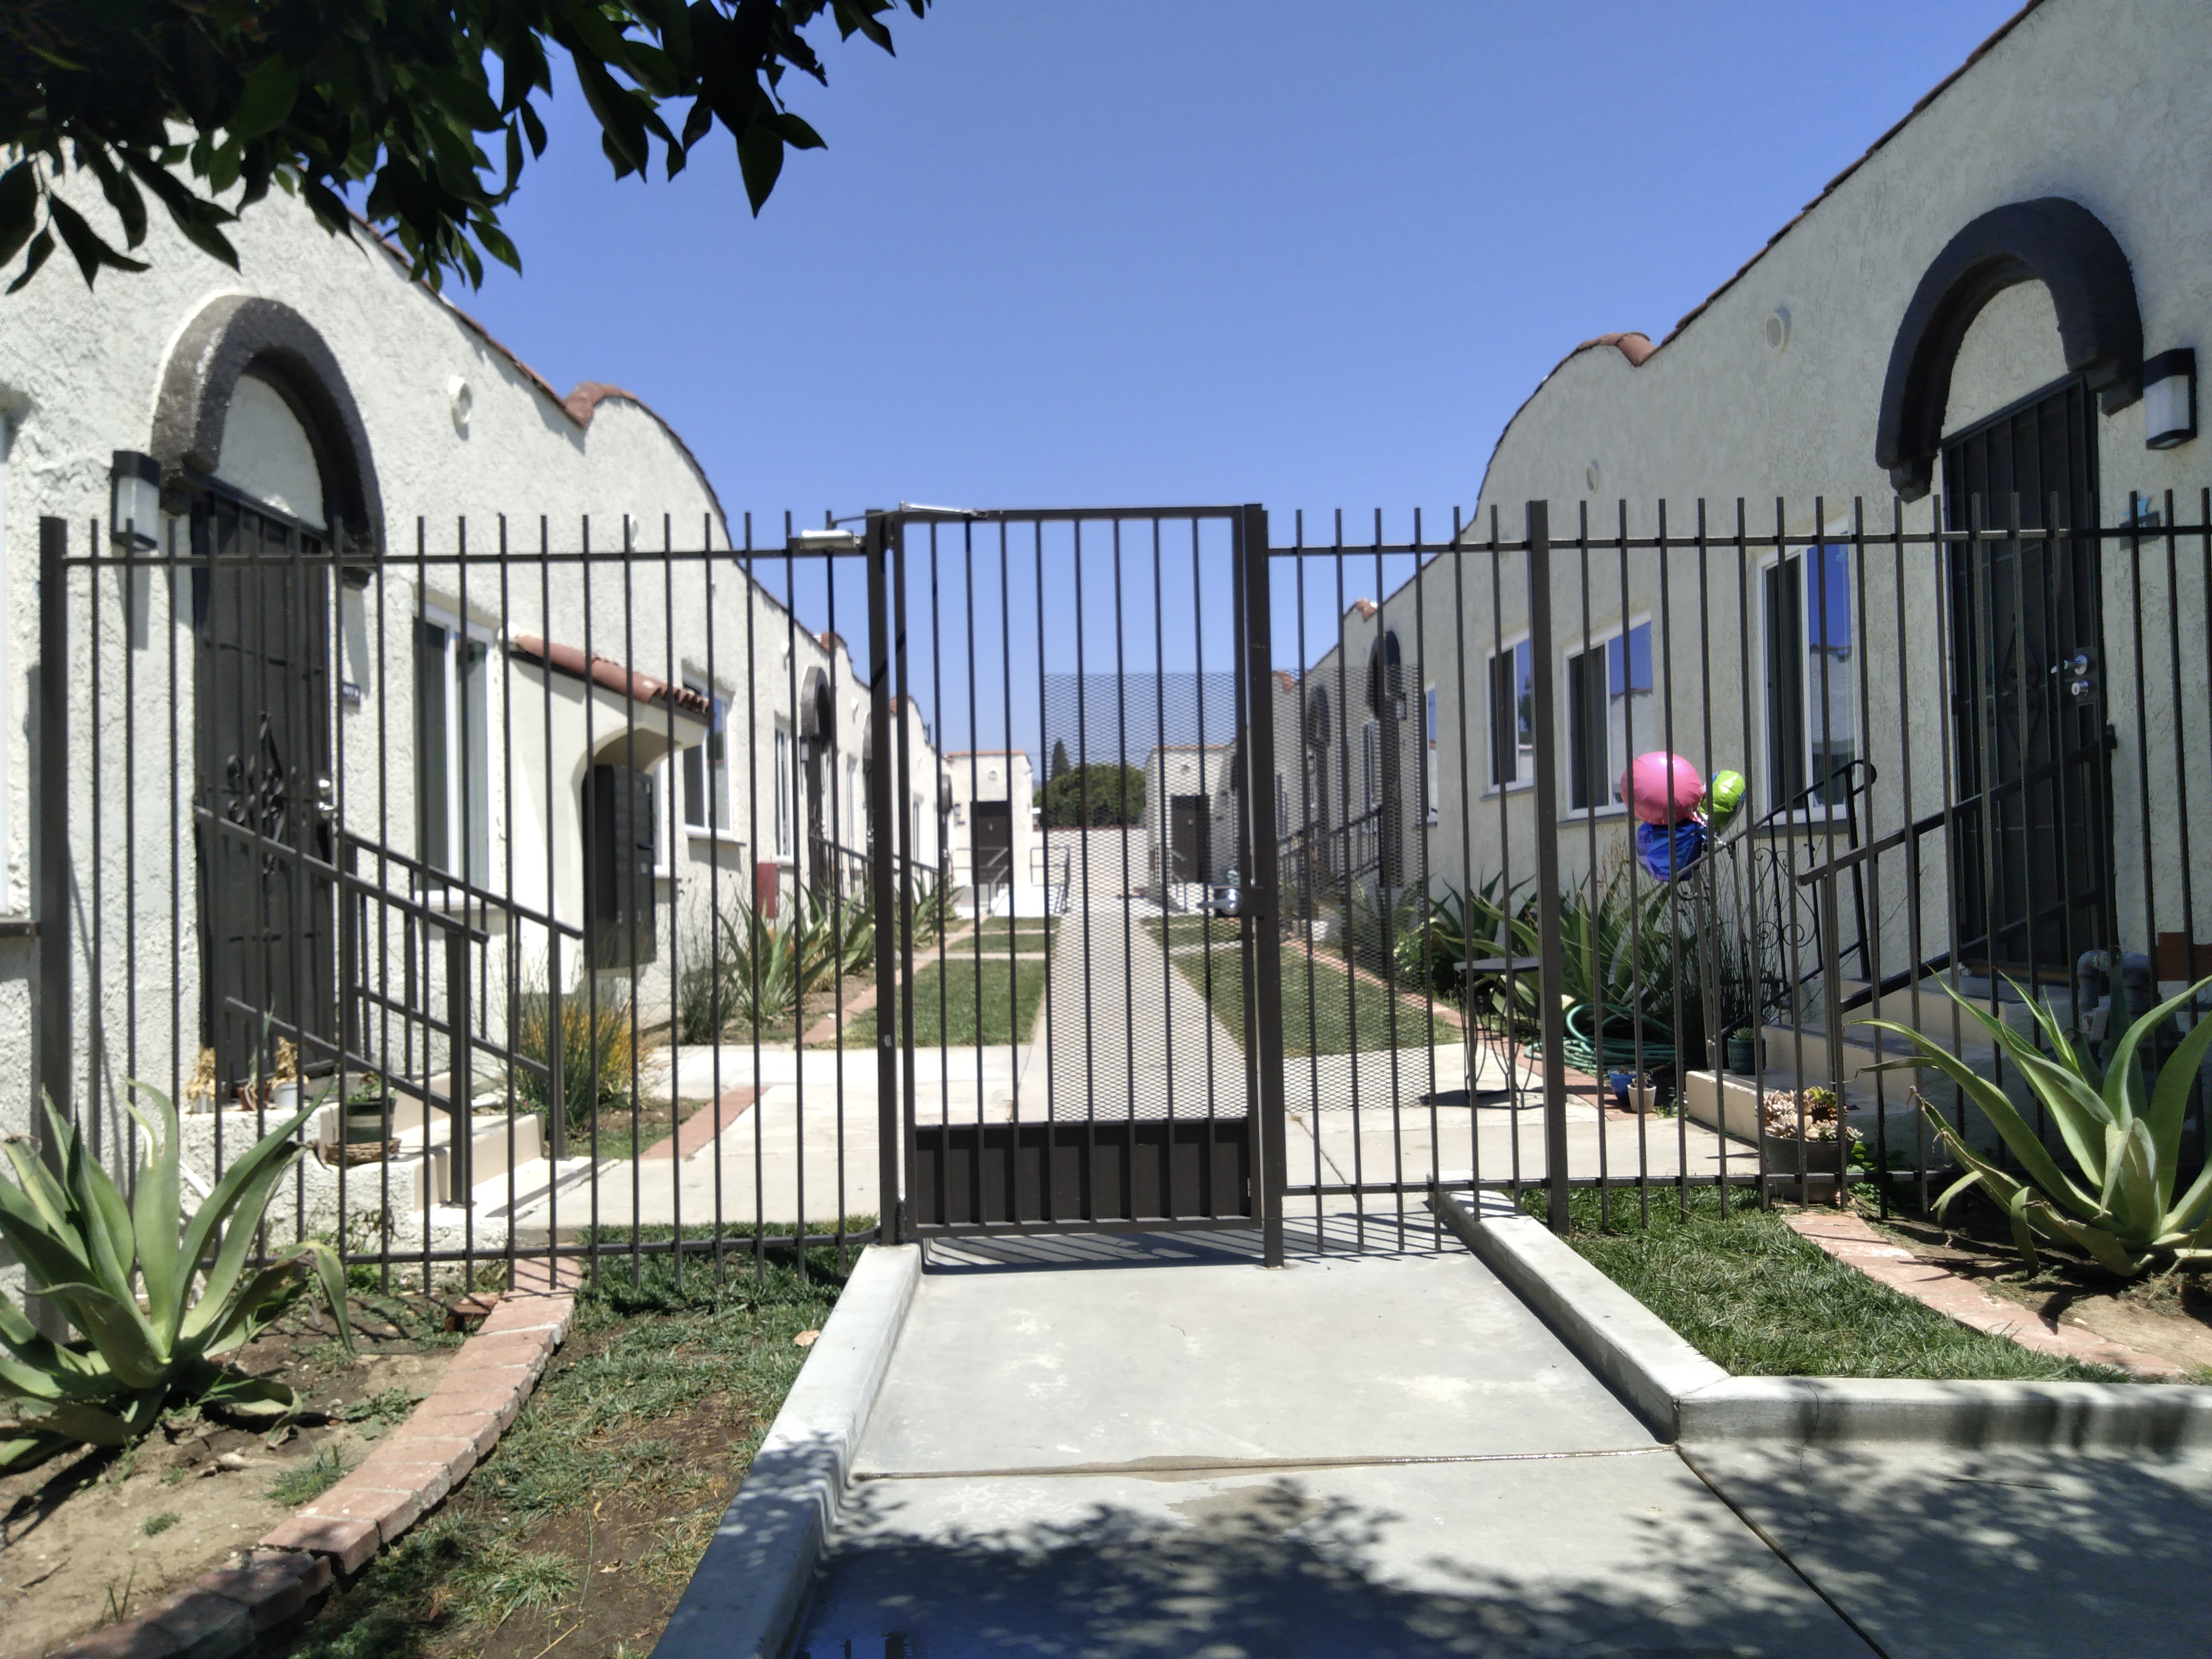 Black steel front gate, courtyard style, each apartment with a three step and handrail entrance, Aloe vera plant on each side of the main entrance and all along next to each apartment. Colorful ballons in front of one apartment